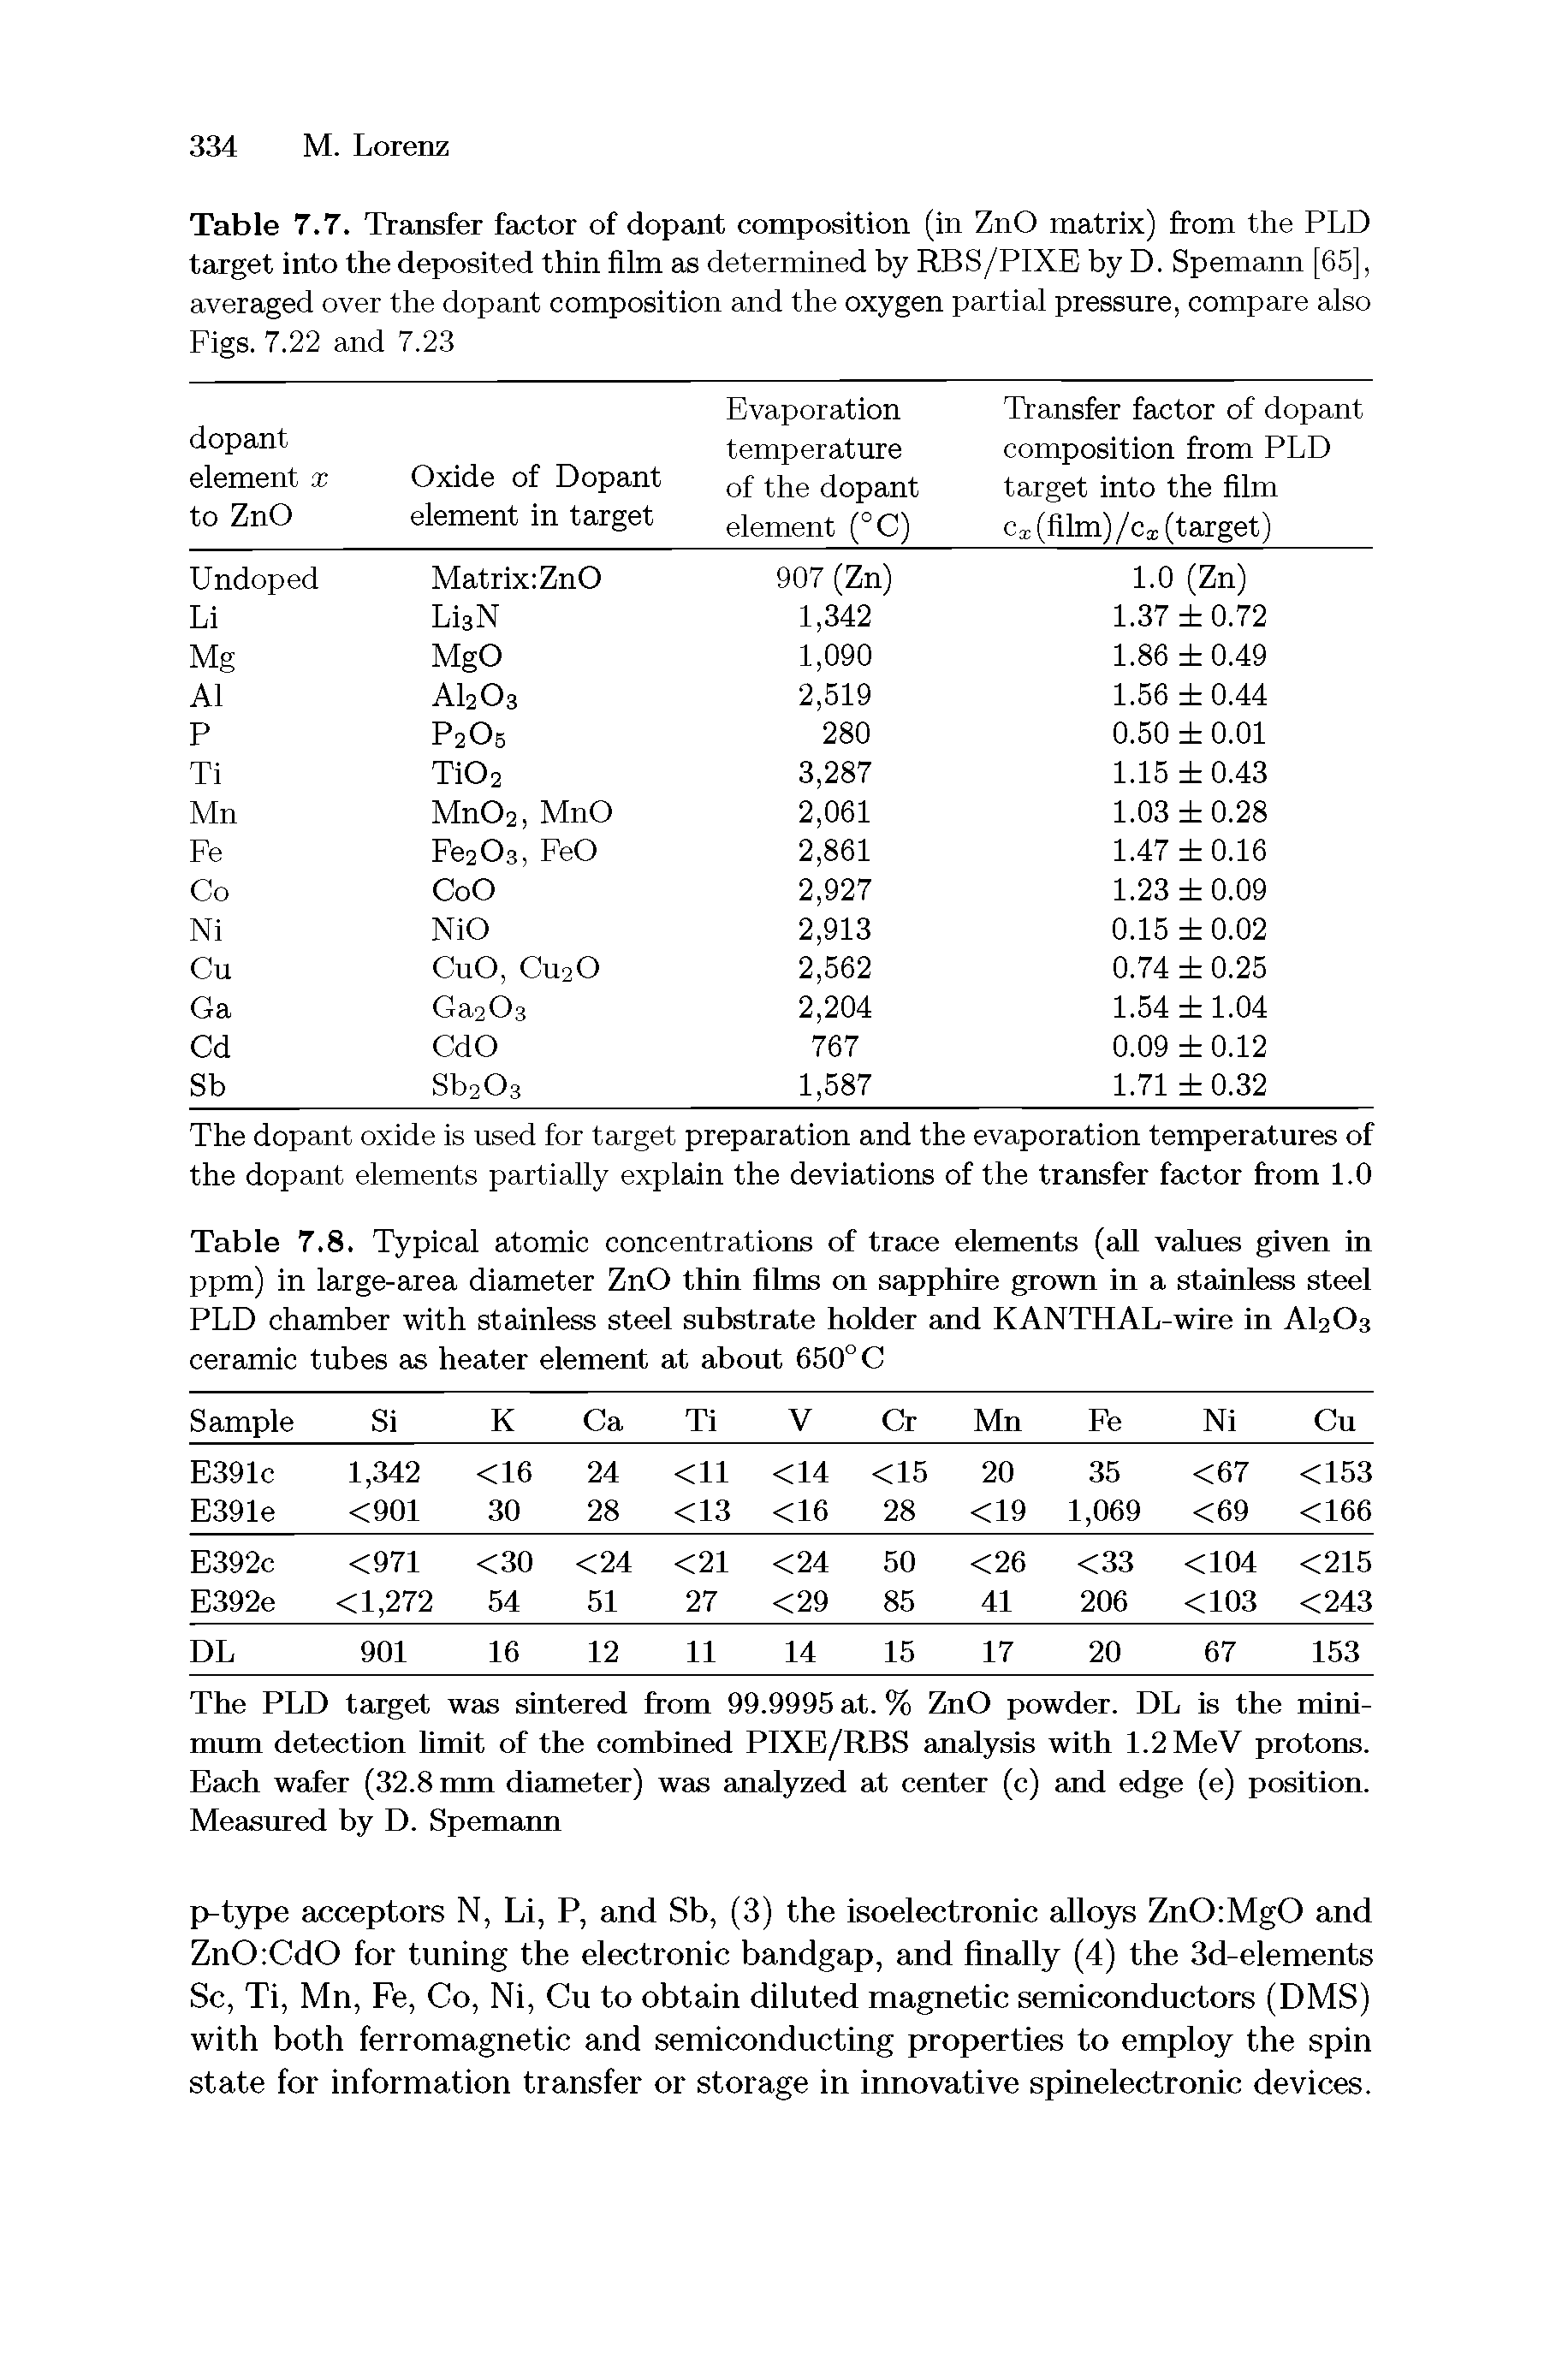 Table 7.8. Typical atomic concentrations of trace elements (all values given in ppm) in large-area diameter ZnO thin films on sapphire grown in a stainless steel PLD chamber with stainless steel substrate holder and KANTHAL-wire in AI2O3 ceramic tubes as heater element at about 650° C...